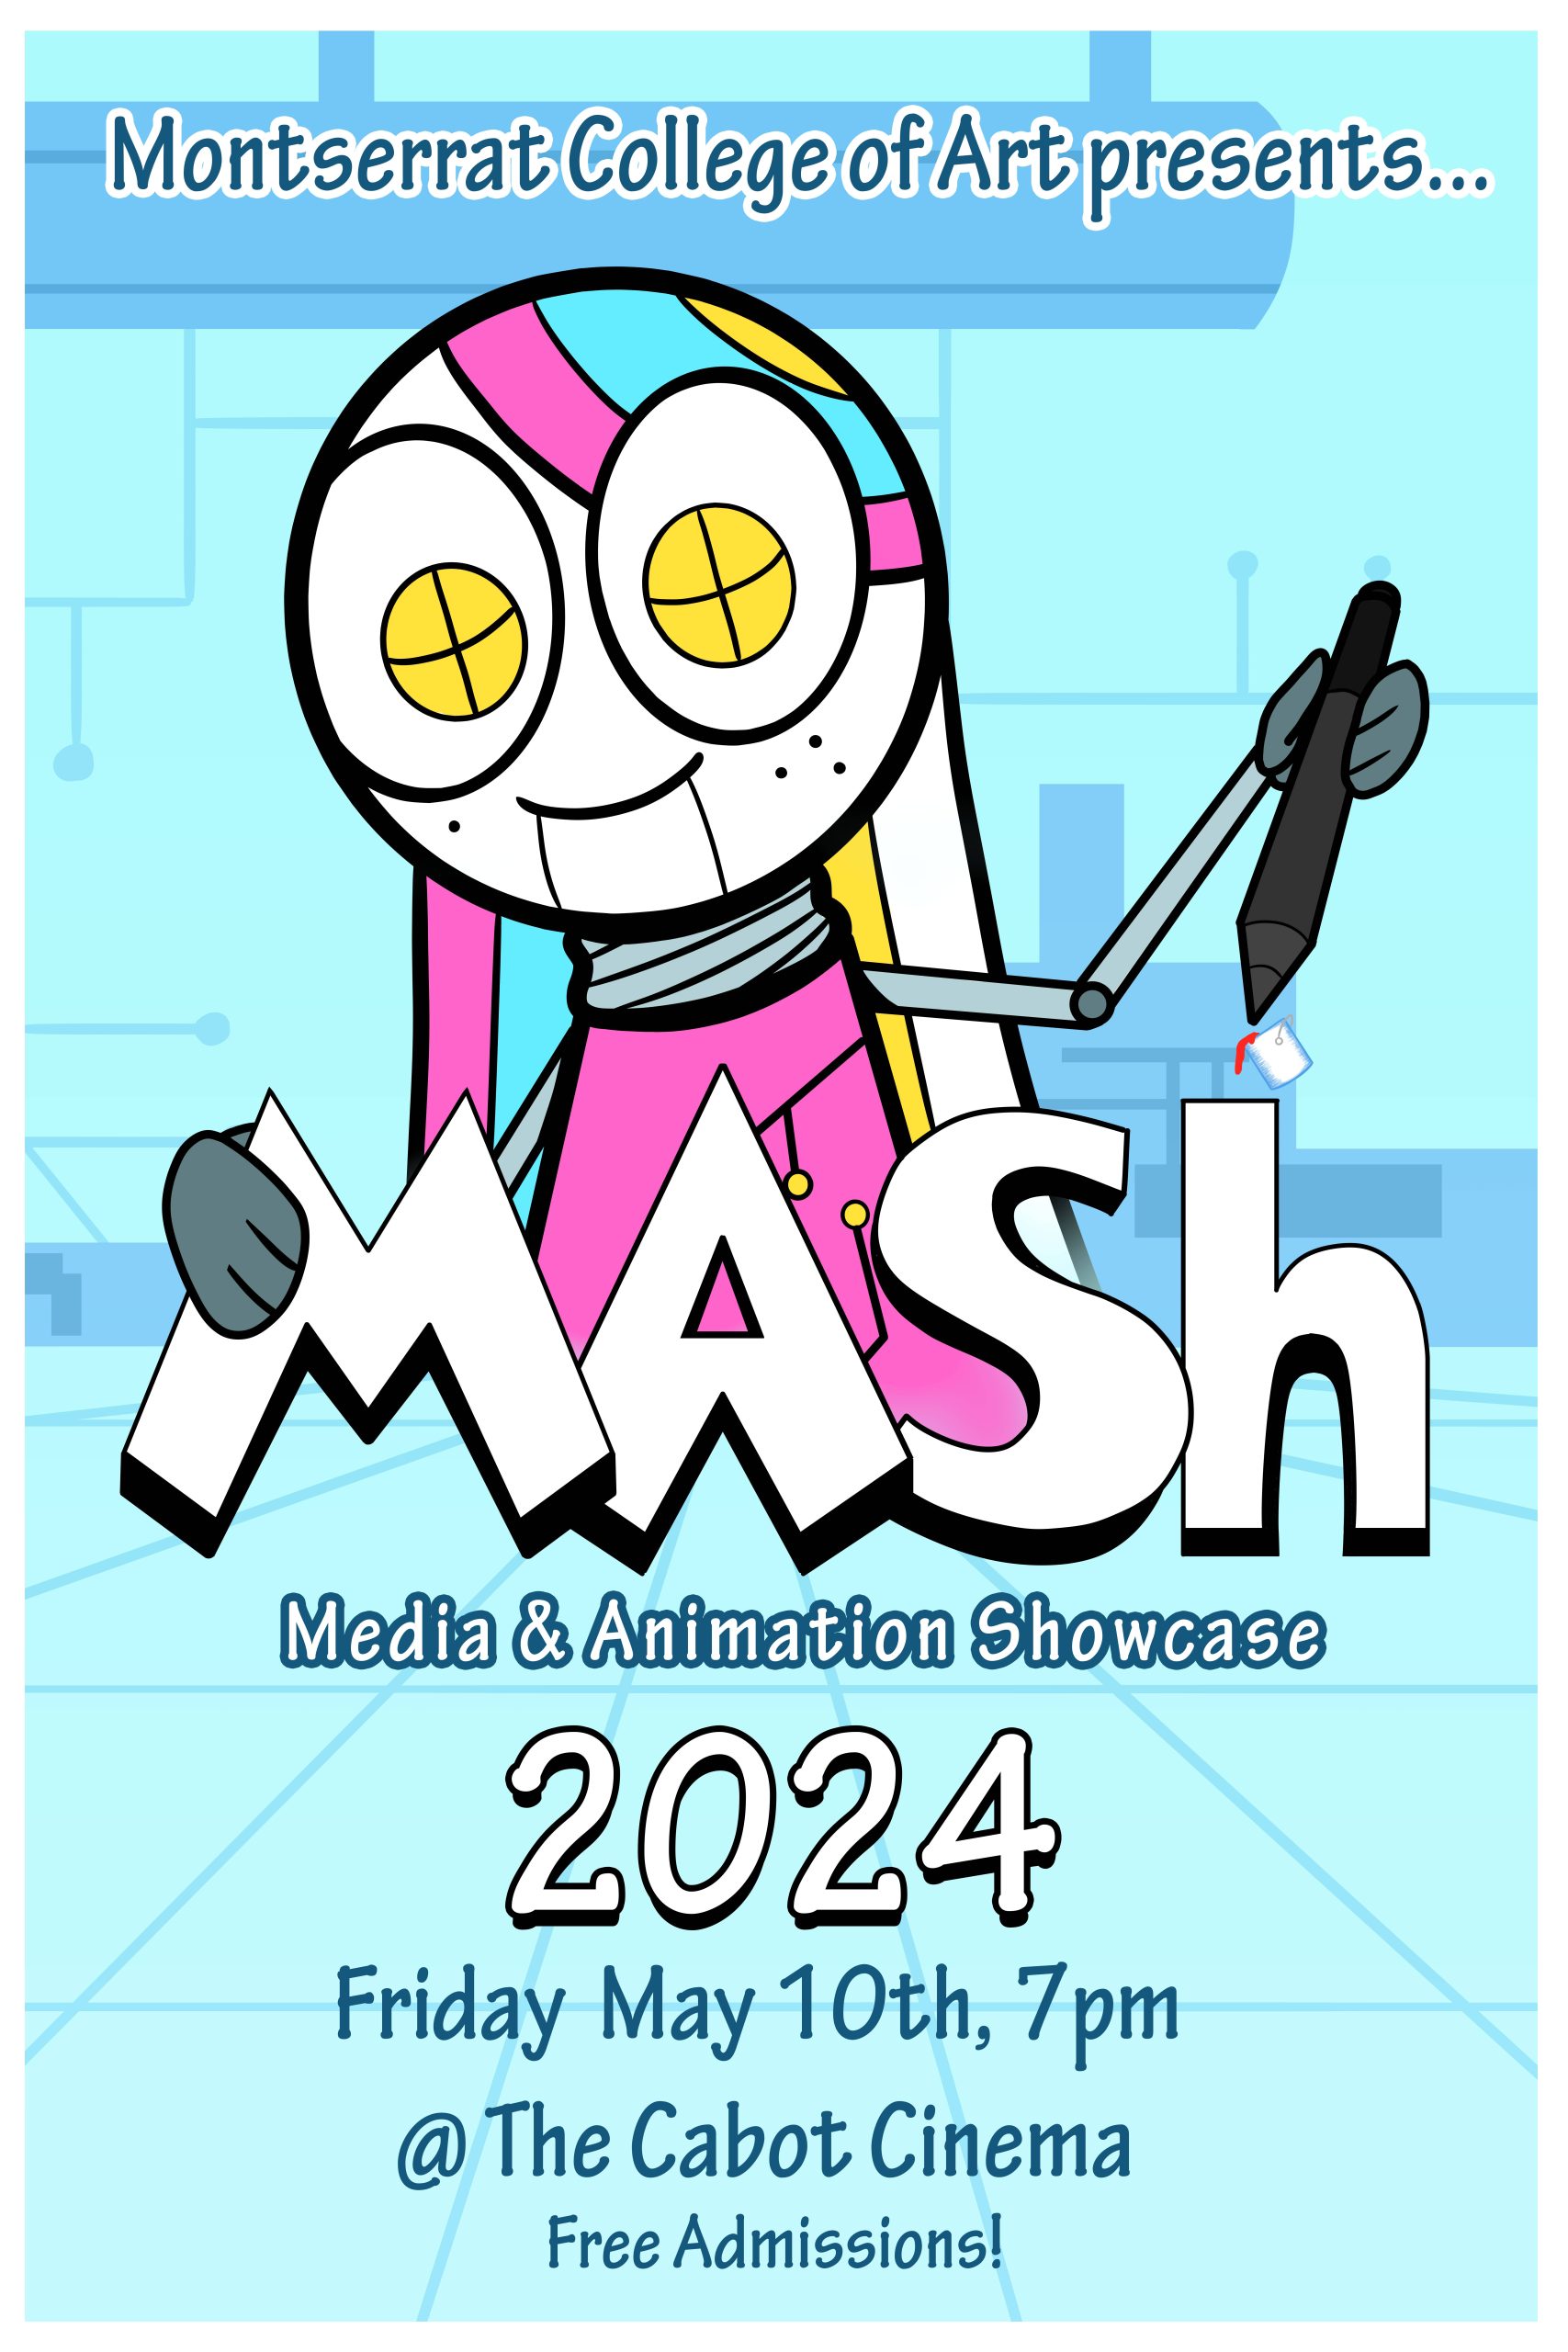 Join us at the Montserrat College of Art's exciting Mash 2024 event! Come see our vibrant poster design featuring a lively cartoon character with a mic, ready to steal the show. This creative spectacle is taking place at the iconic Cabot Cinema - save the date and don't miss out!